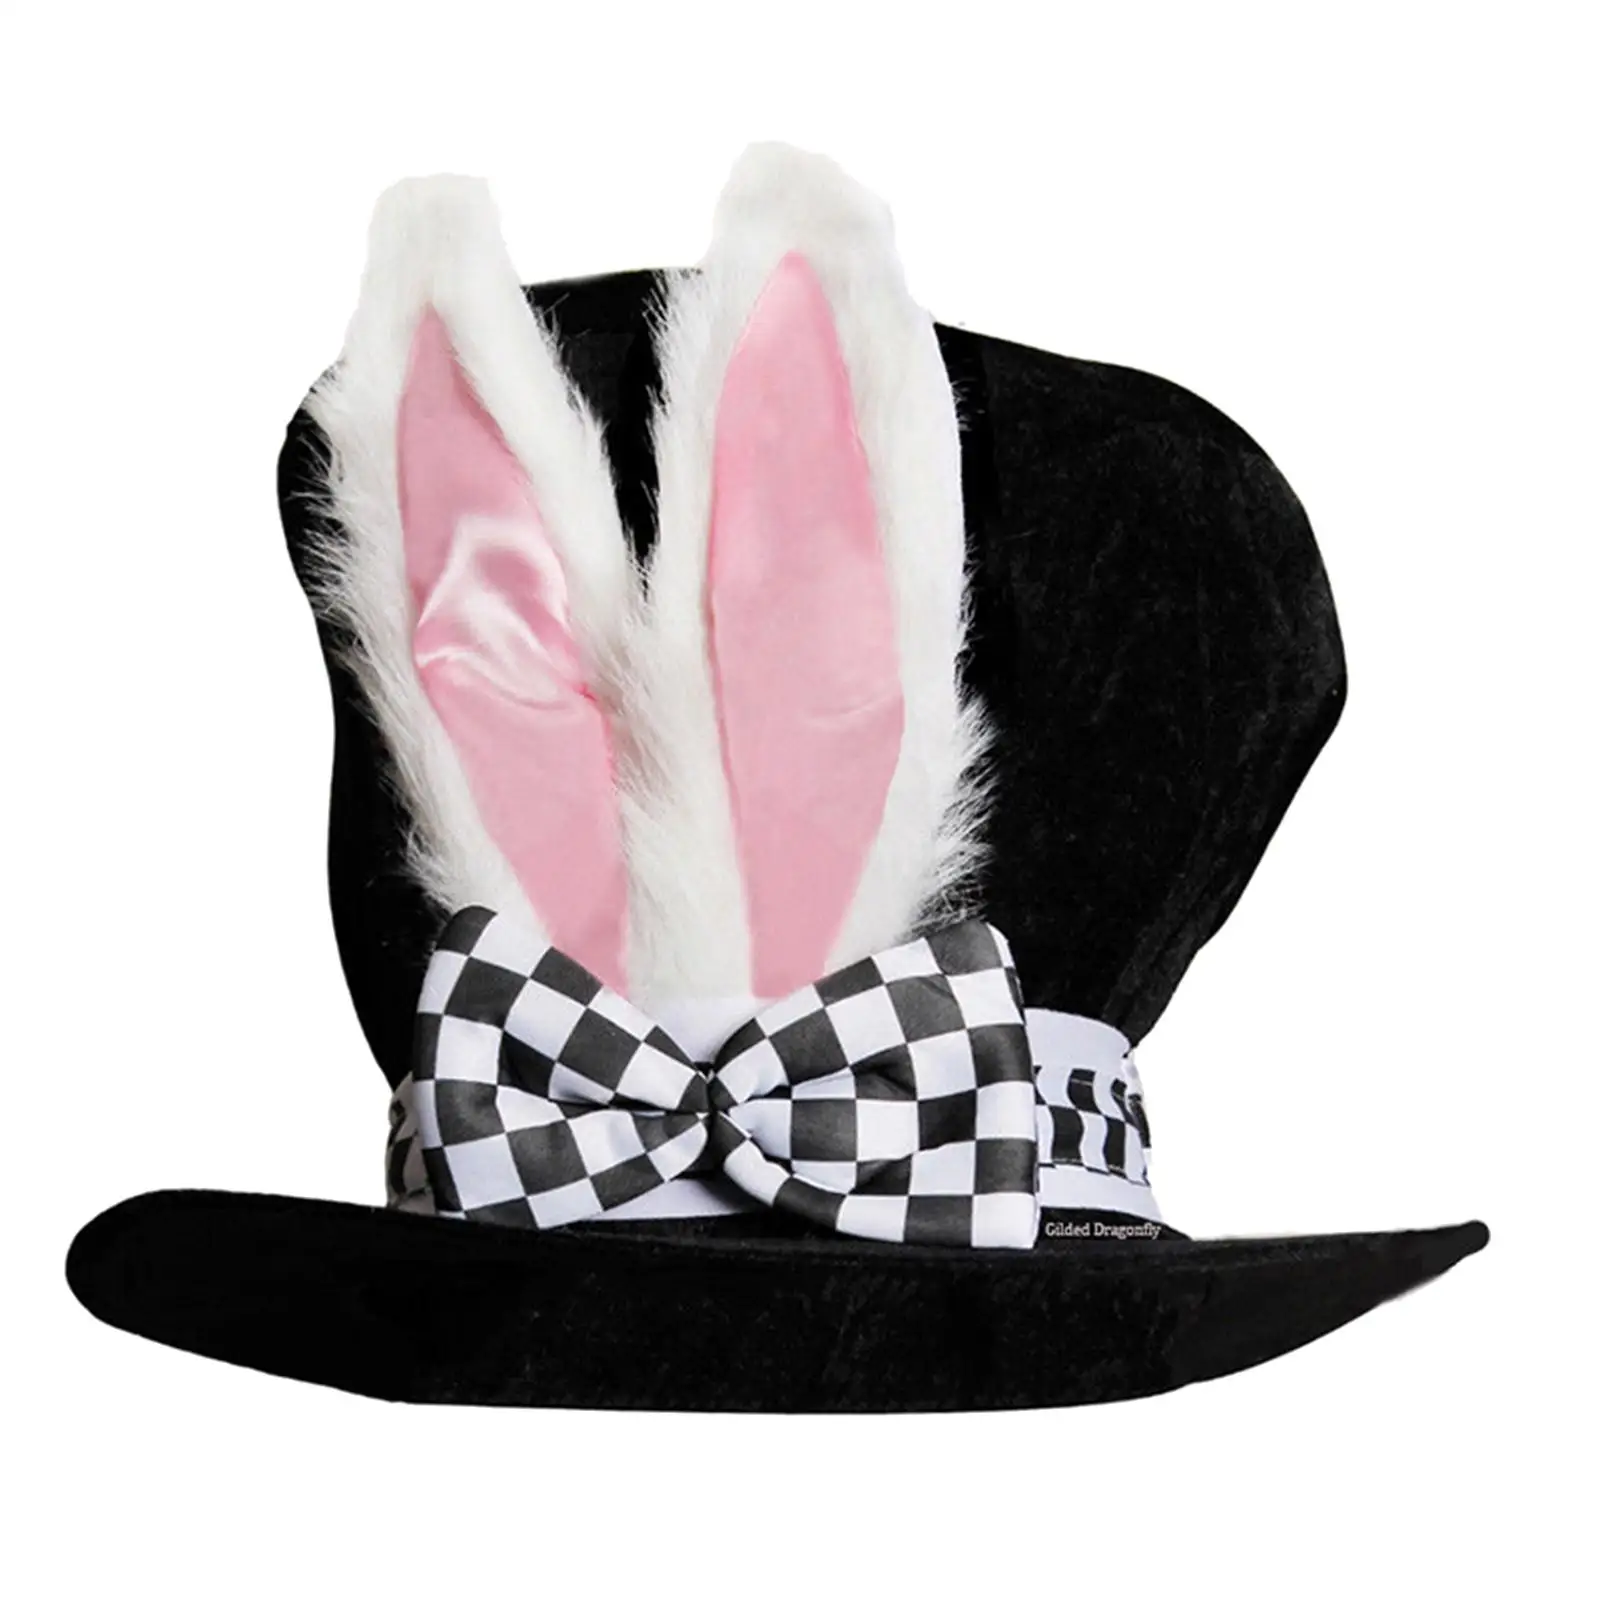 Man Velvet Bunny Ear Top Hat Cute Seasonable Hand Wash Dress up Hat Easter Bonnet Fun Novelty Holiday Hat ,One Size Fits All